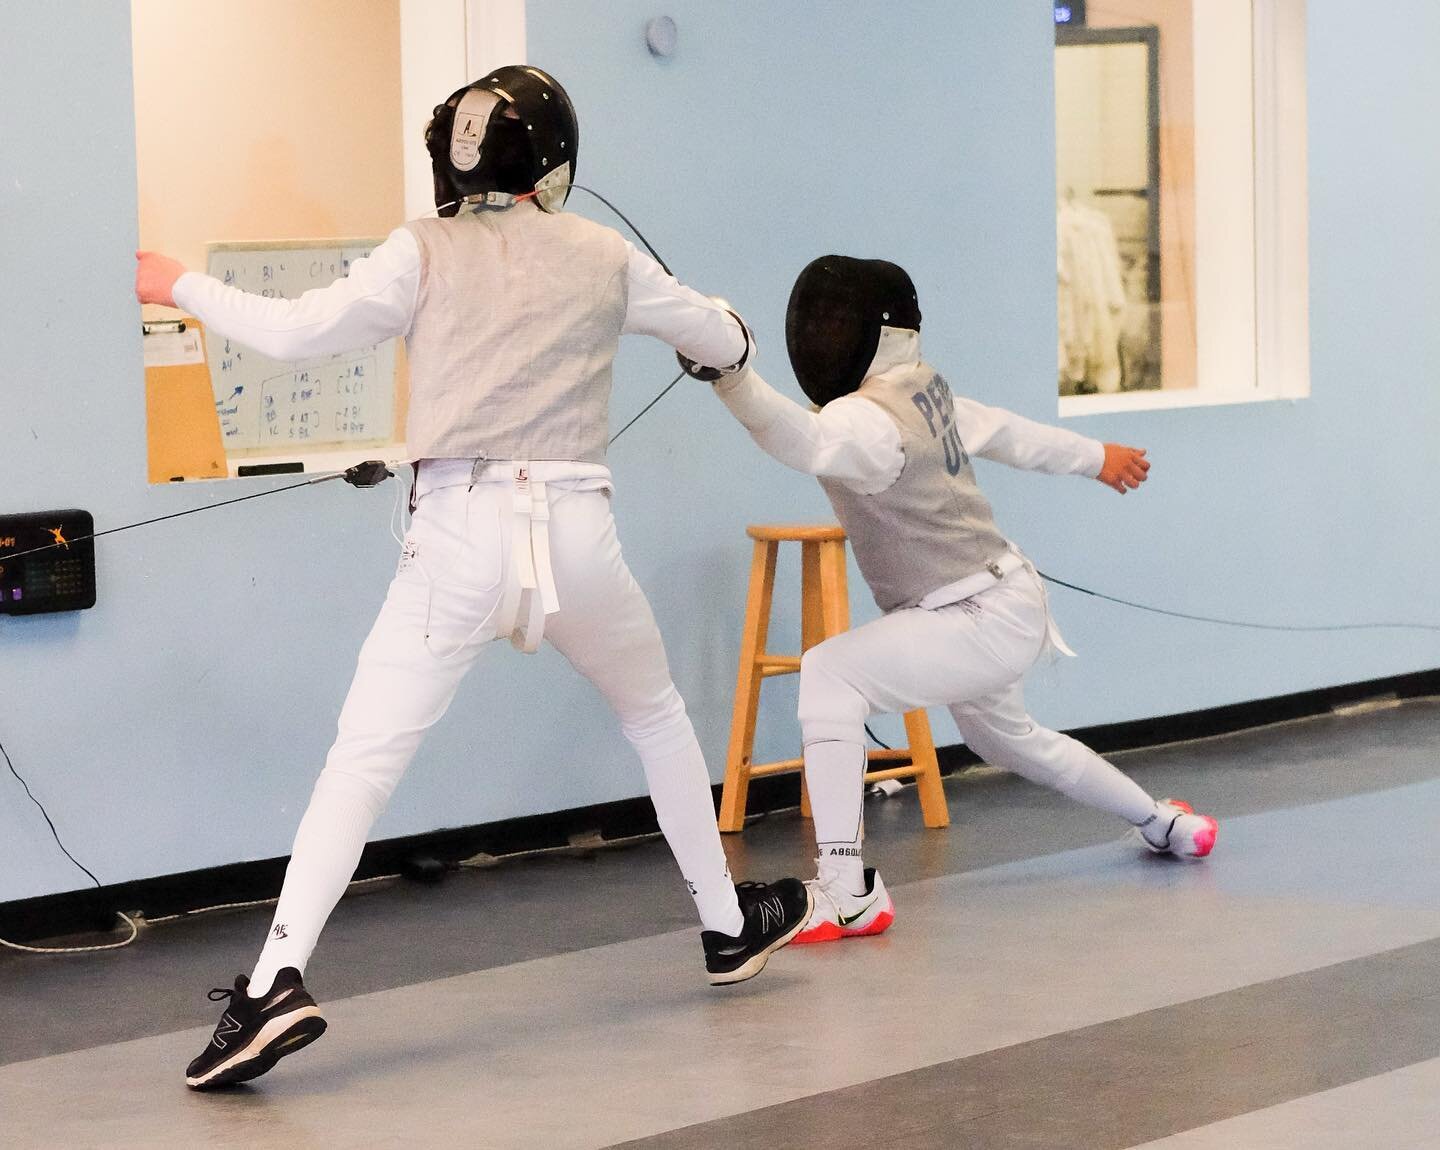 Some more shots of fencers in action at last Friday&rsquo;s Unrated Foil event!
.
.
. 
.
.
.
. 

#manchenfencing  #sport #athlete #fencing #foil #duel #sportphotography #fencingmask #fencingblade #fencingclub #competition #manchenfridaynight #usafenc